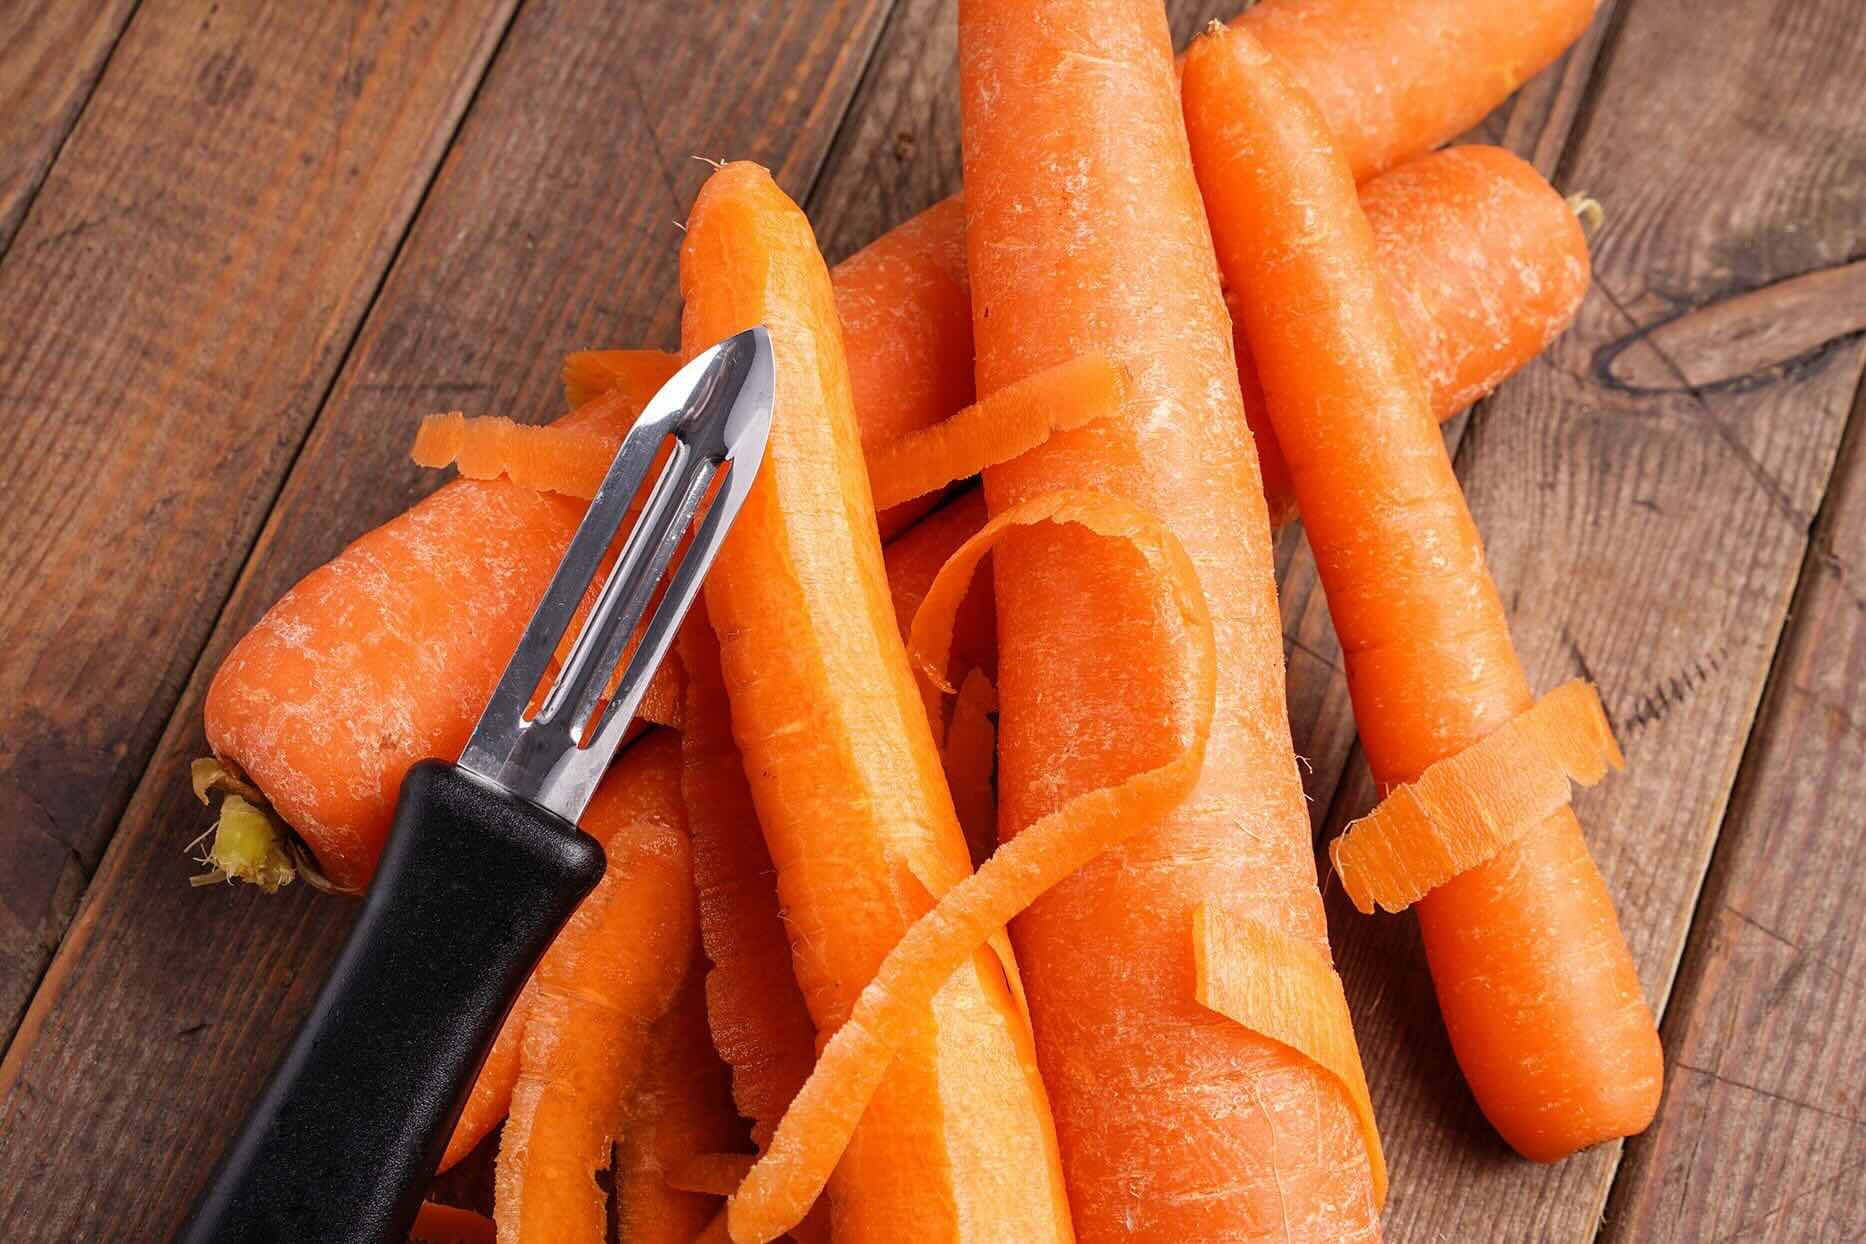 How To Store Peeled Carrots